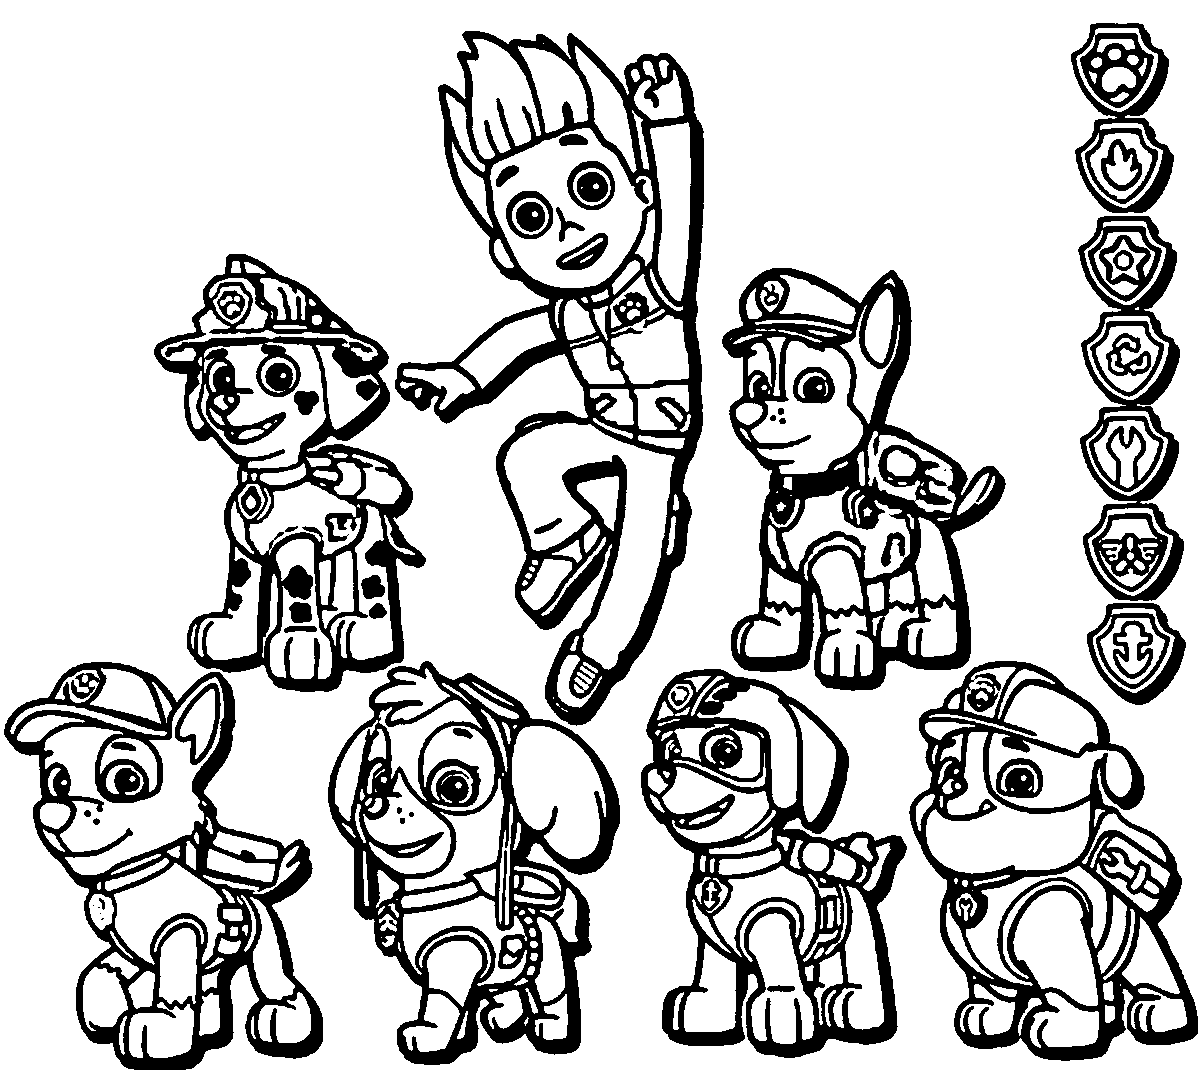 Paw Patrol 5 Coloring Pages Cartoons Coloring Pages Coloring Pages Porn Sex Picture